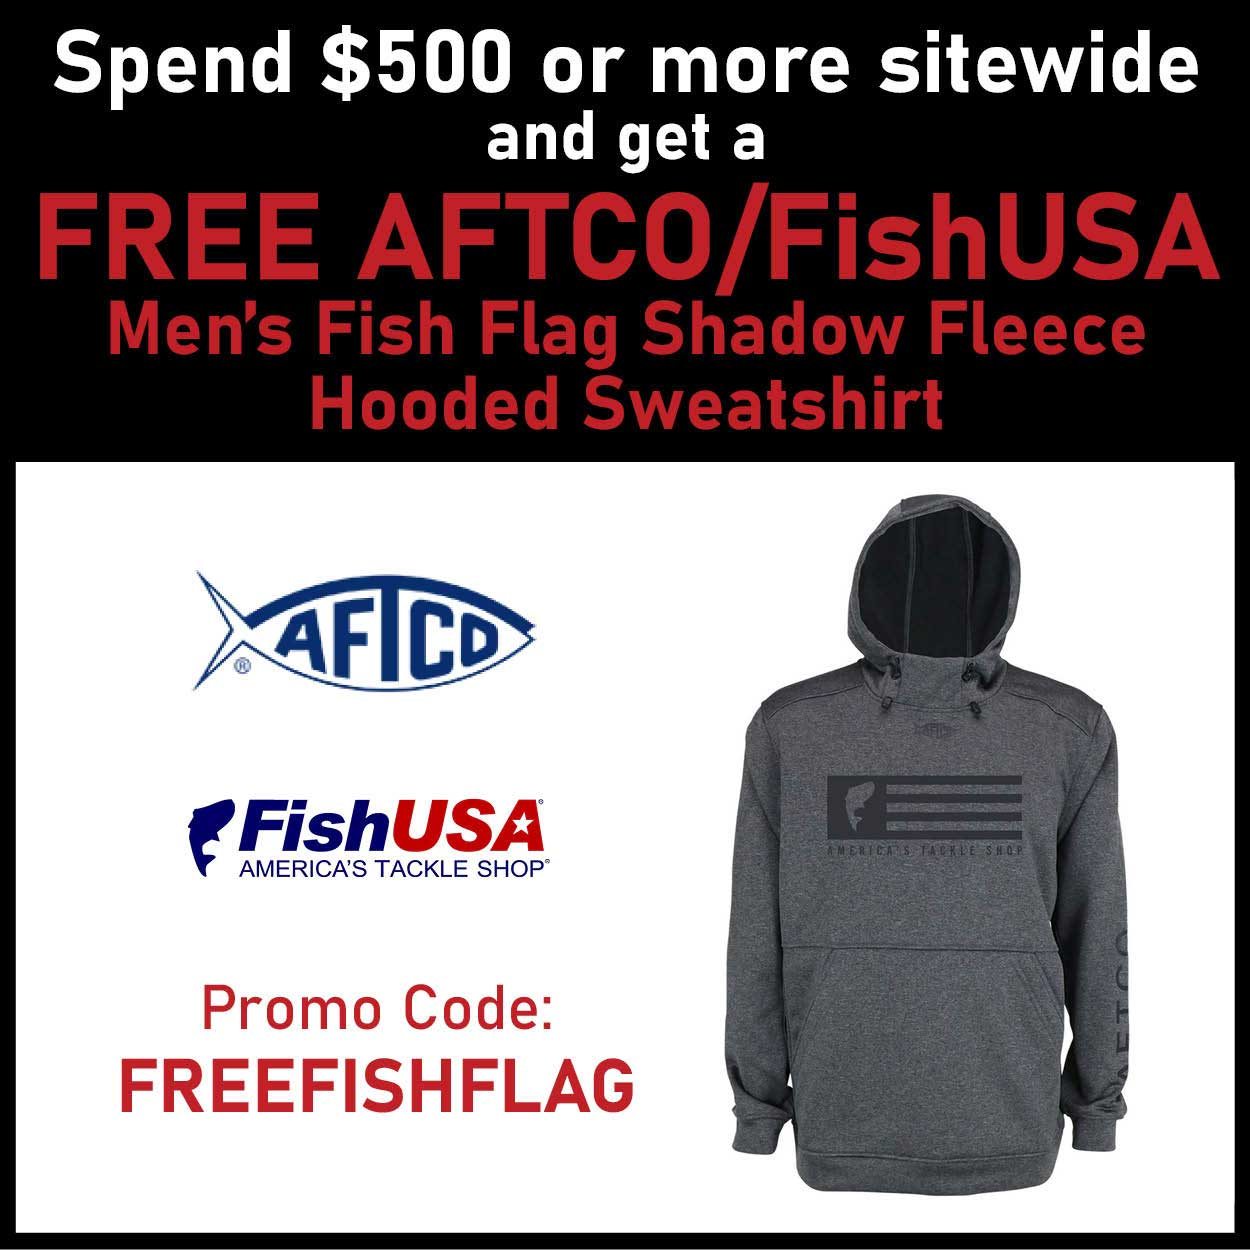 Get a Free AFTCO FishUSA Men's Fish Flag Shadow Fleece Hooded Sweatshirt with today's sitewide purchase of $500 or more! Promo Code: FREEFISHFLAG